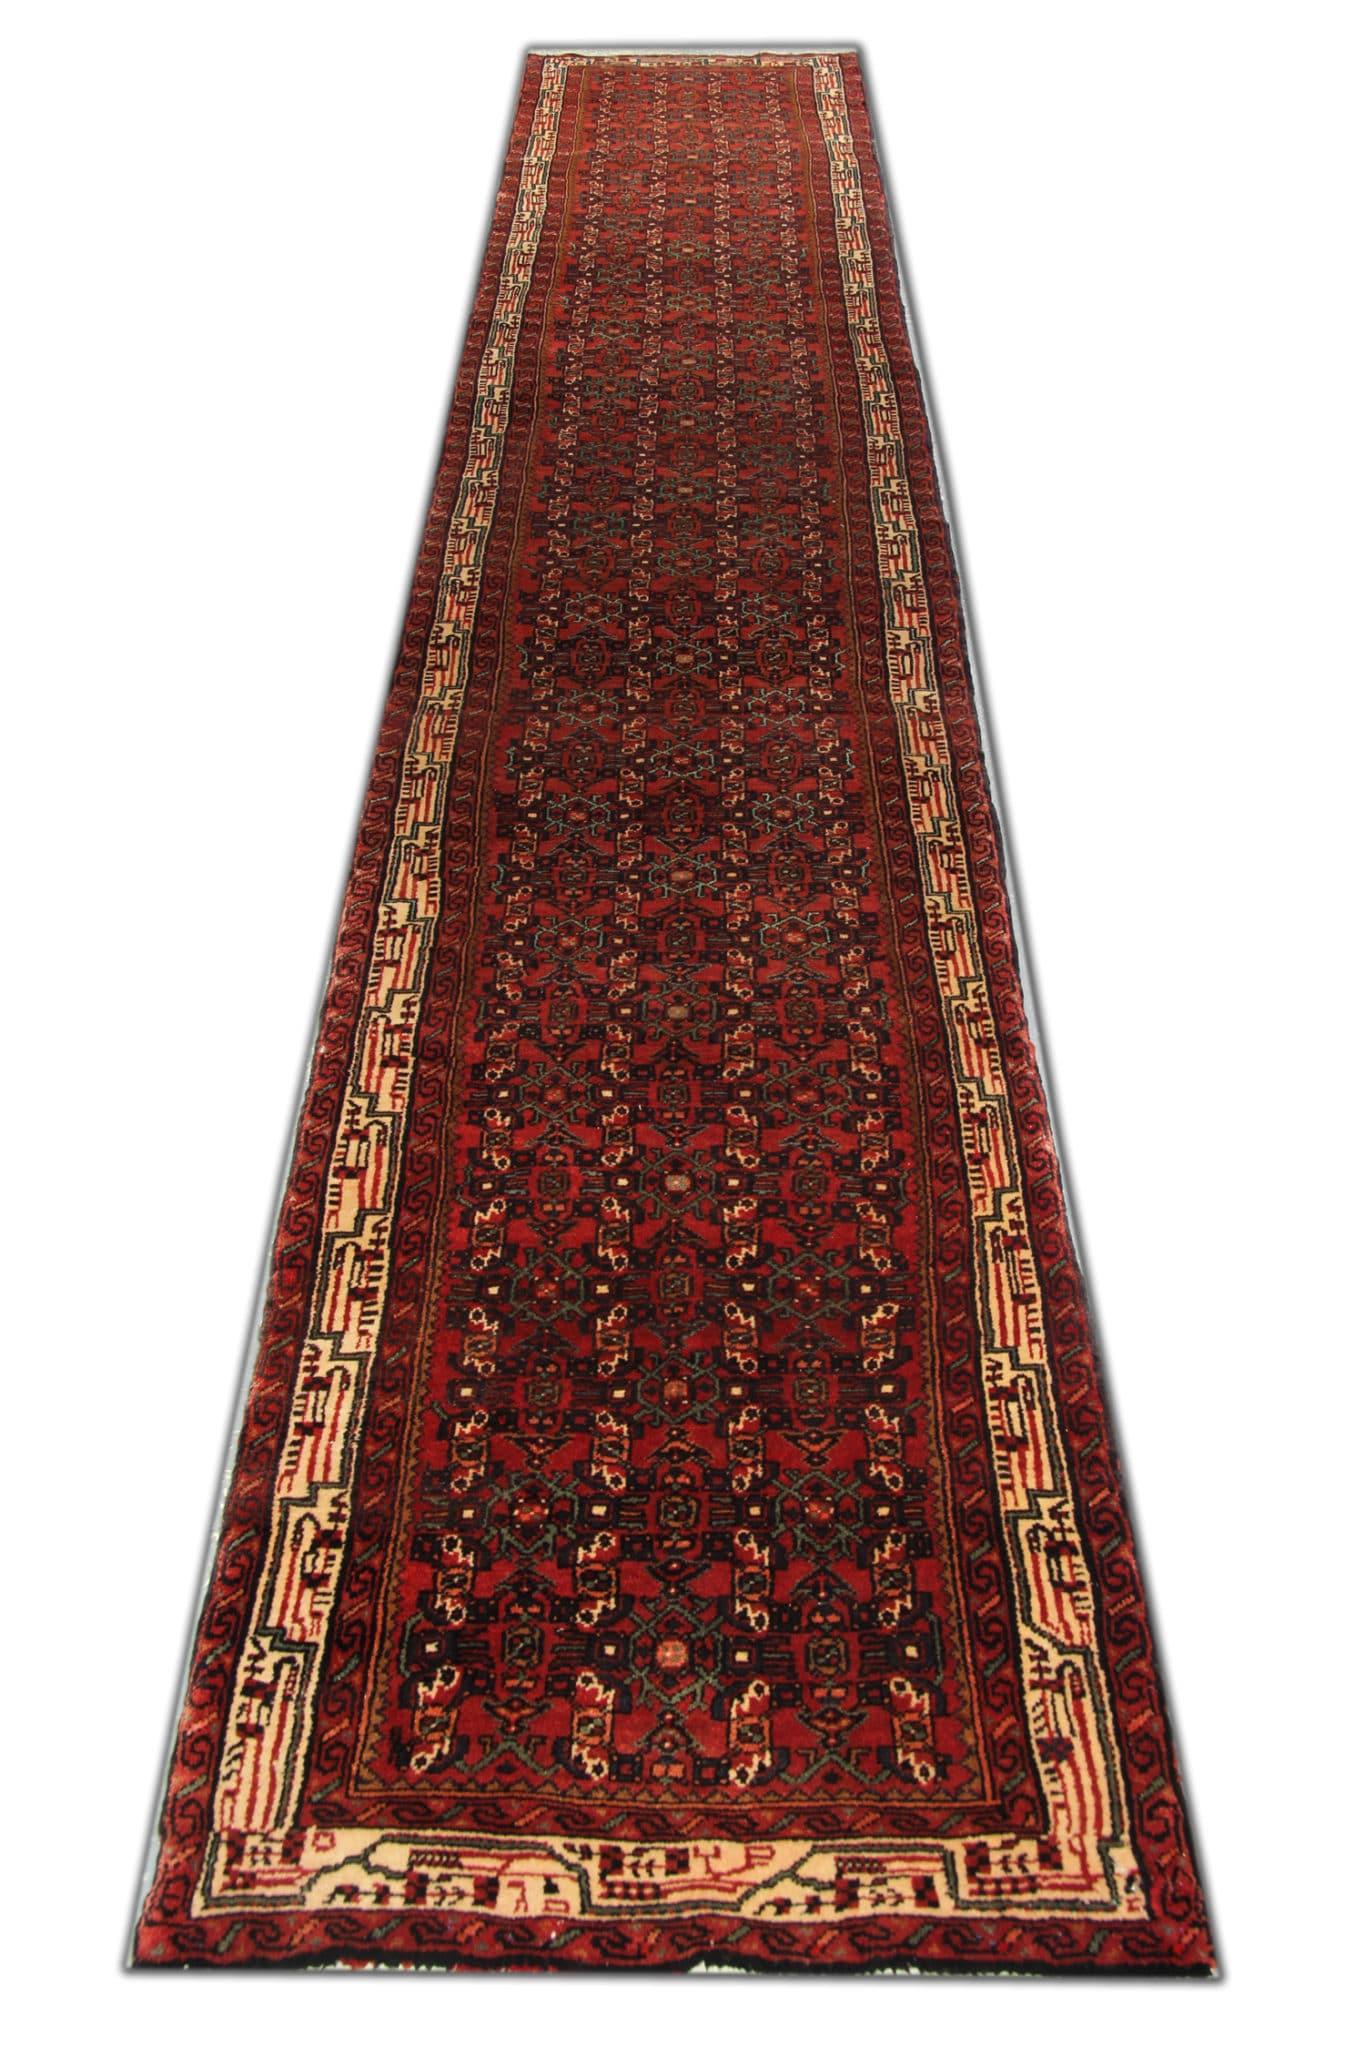 Crafted in the 1950s, this vintage runner rug exudes timeless charm and character, with its deep red and burgundy hues adding warmth and sophistication to any space. The hand-knotted wool pile, complemented by a sturdy cotton foundation, ensures